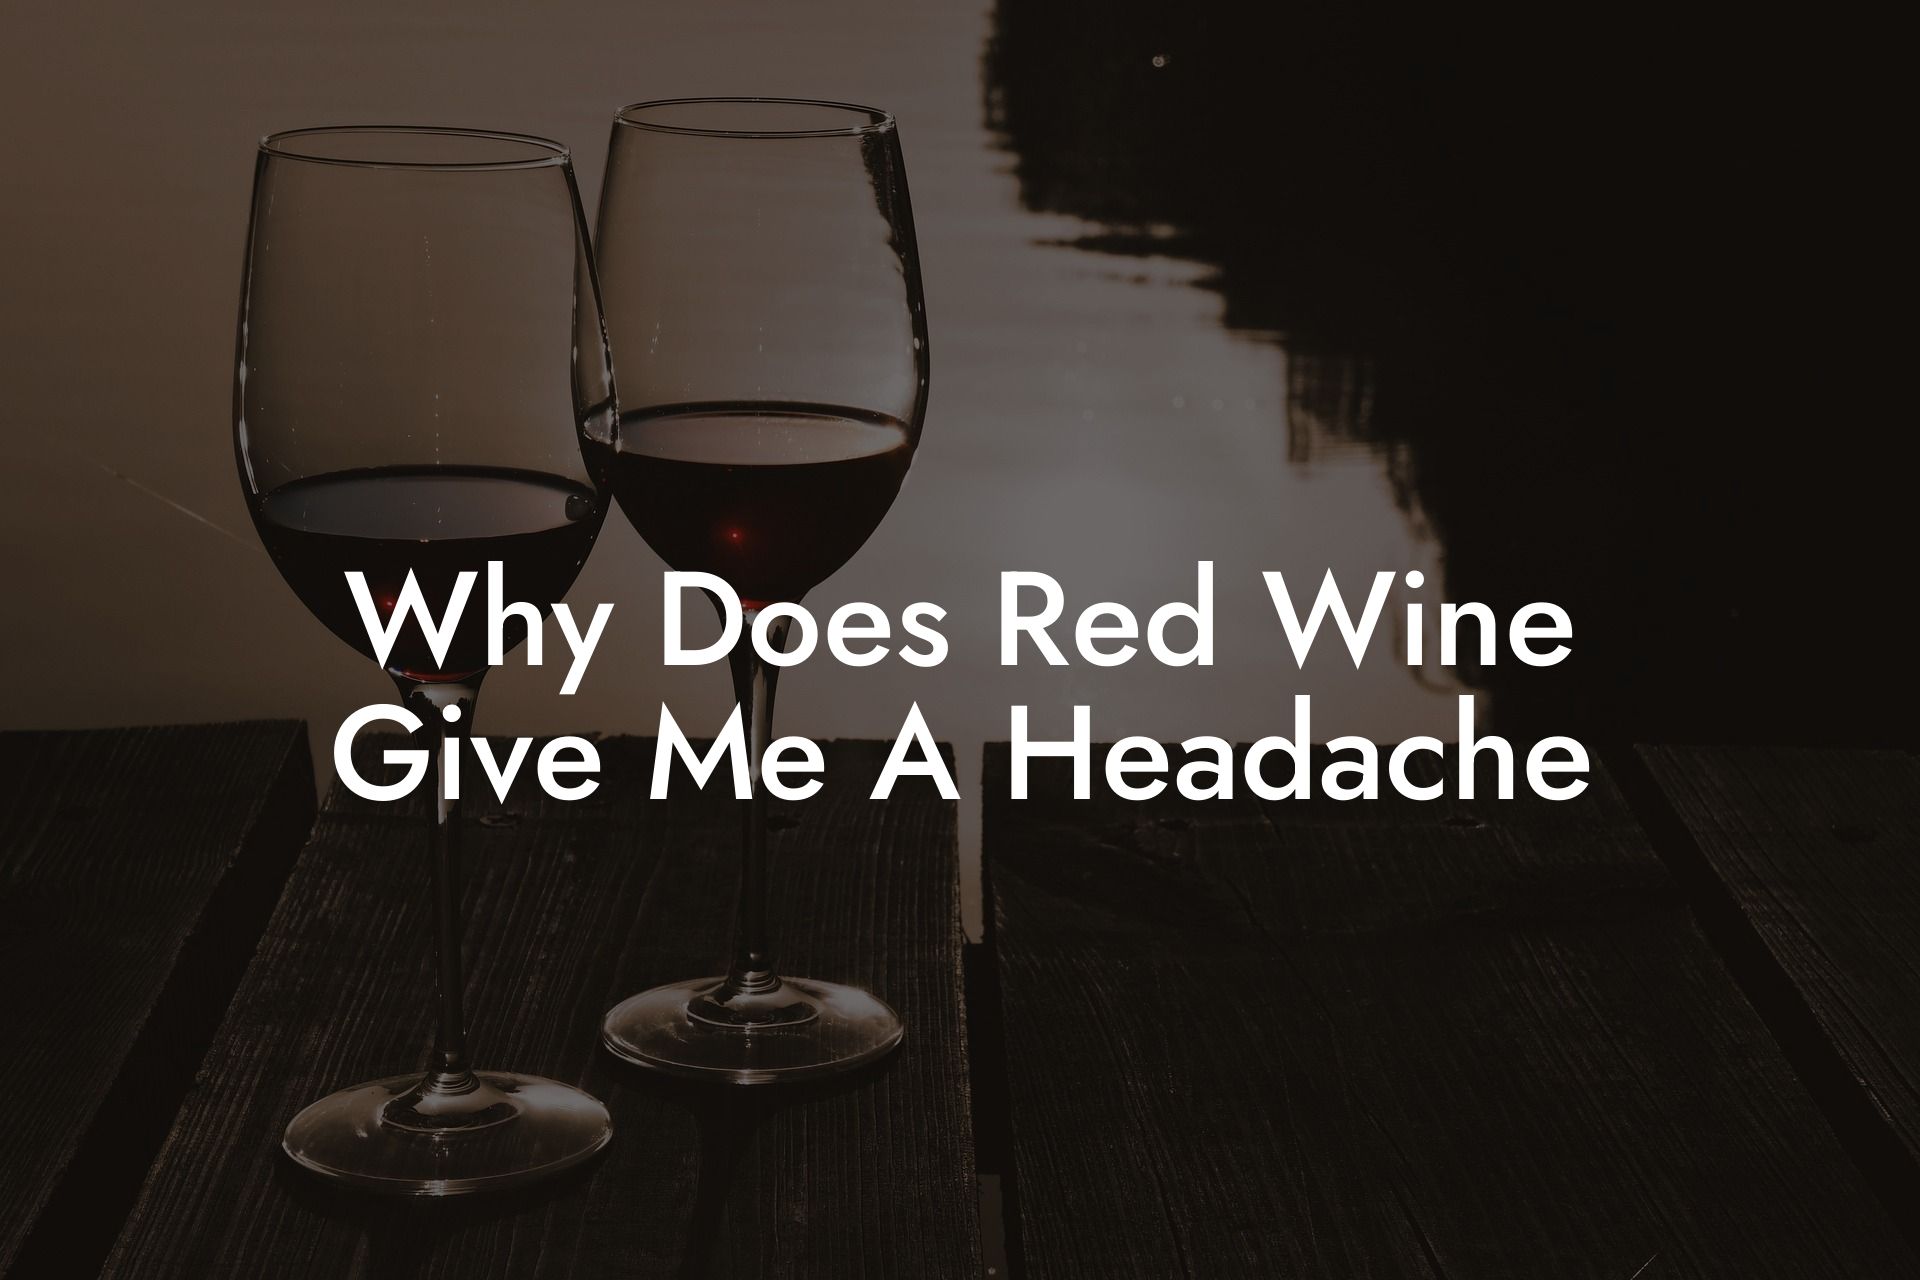 Why Does Red Wine Give Me A Headache